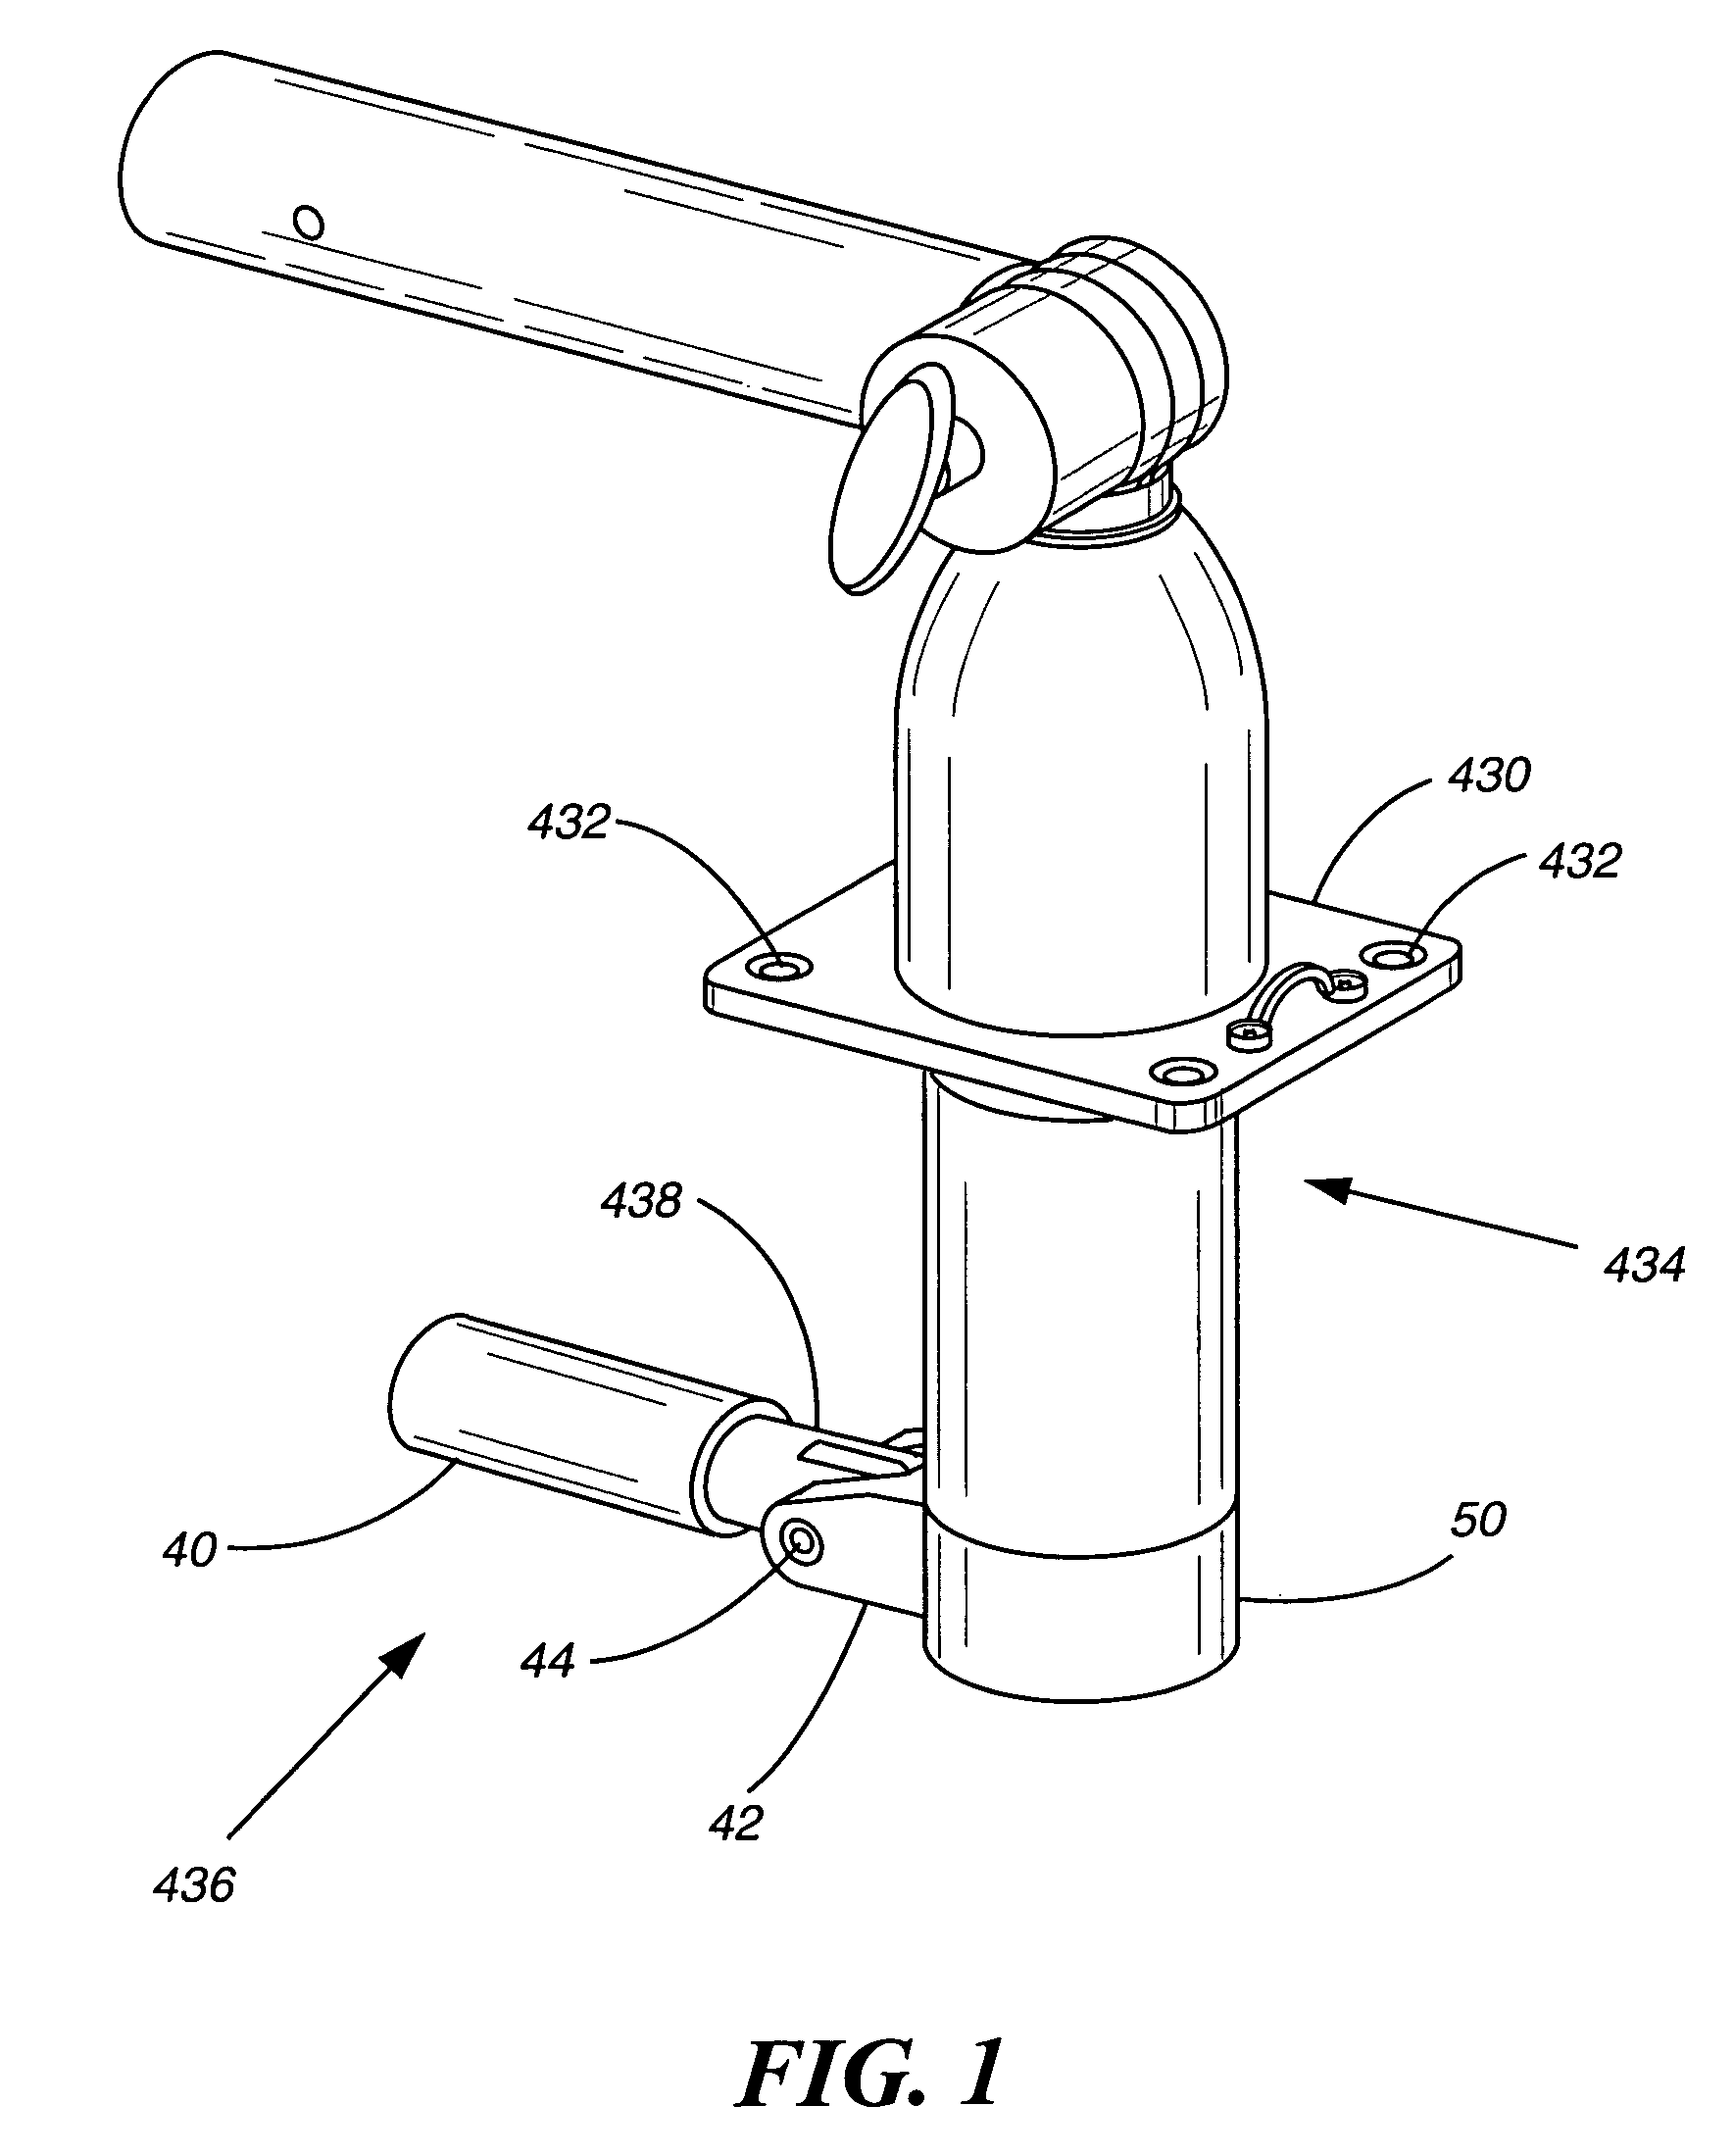 T-top outrigger holder apparatus